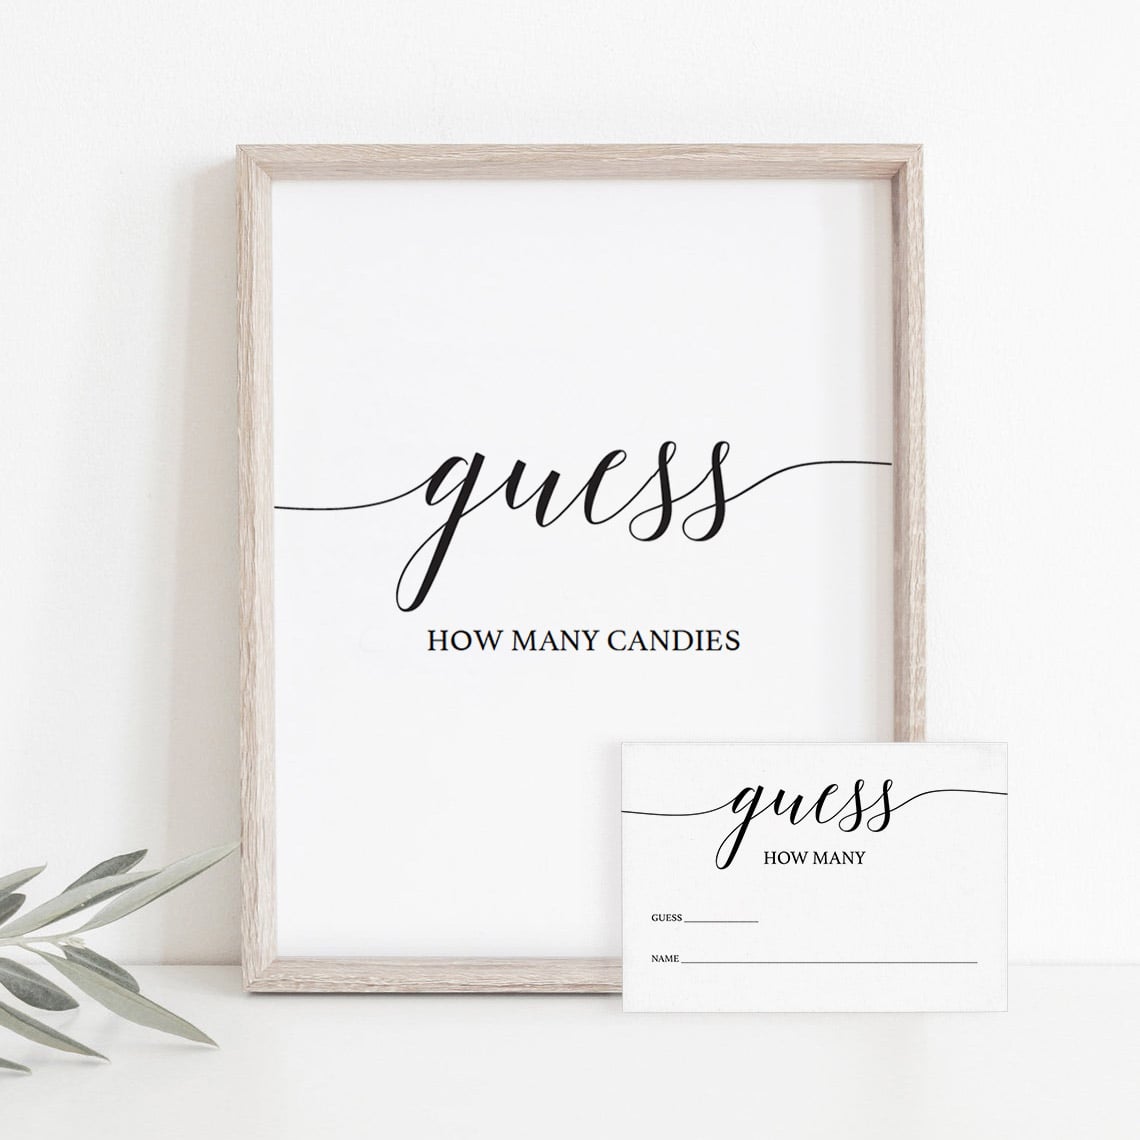 Elegant Guess How Many Sign and Cards Template by LittleSizzle